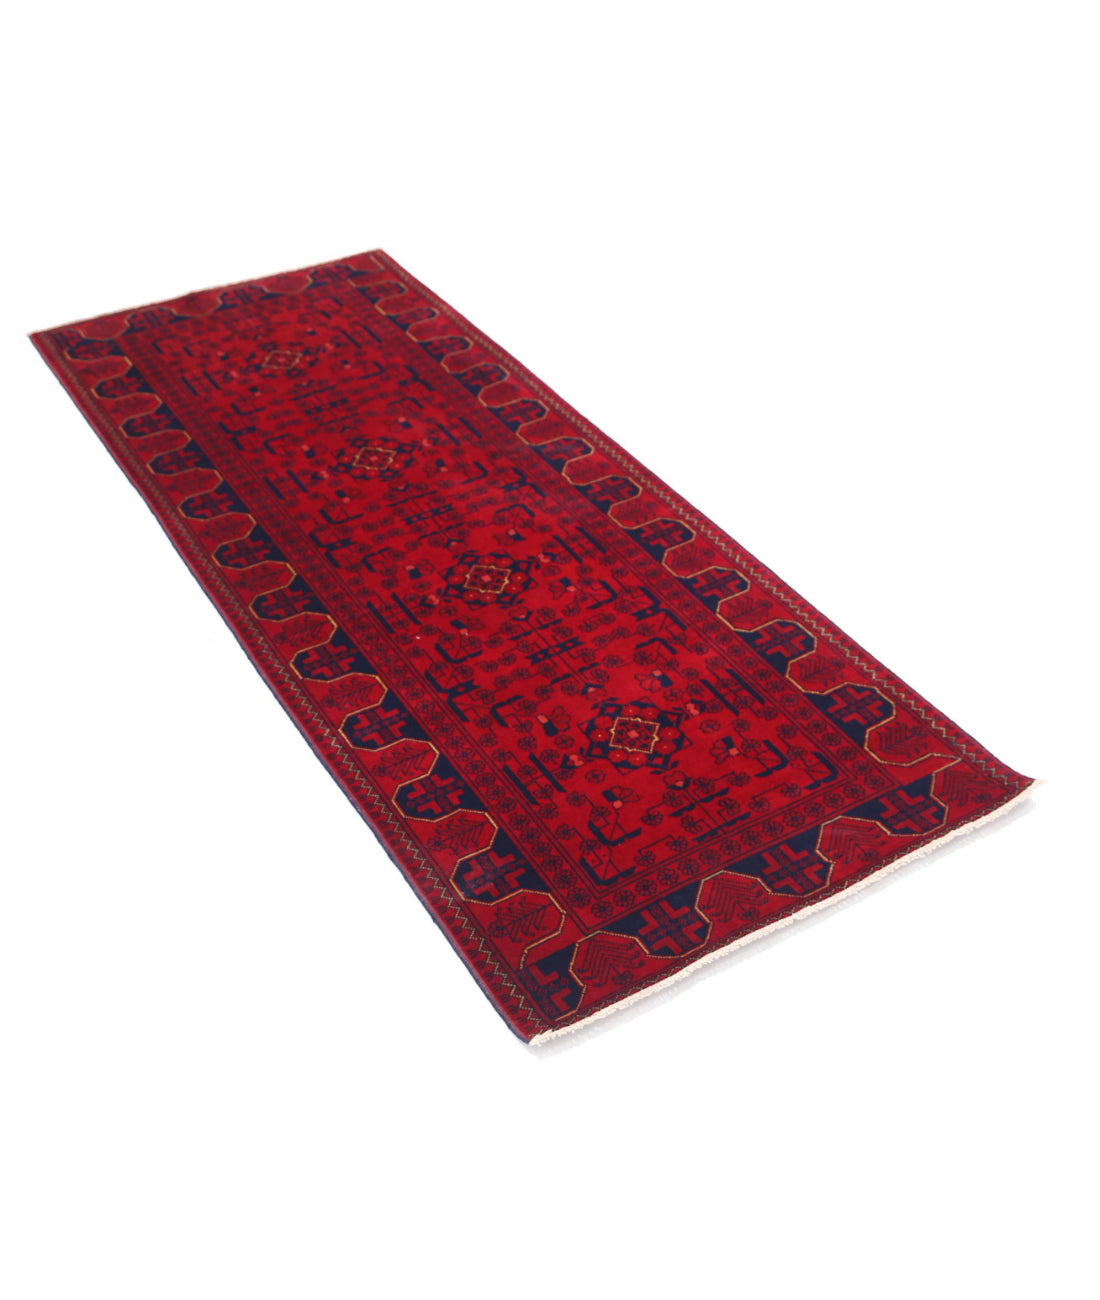 Afghan 2'6'' X 6'3'' Hand-Knotted Wool Rug 2'6'' x 6'3'' (75 X 188) / Red / Red